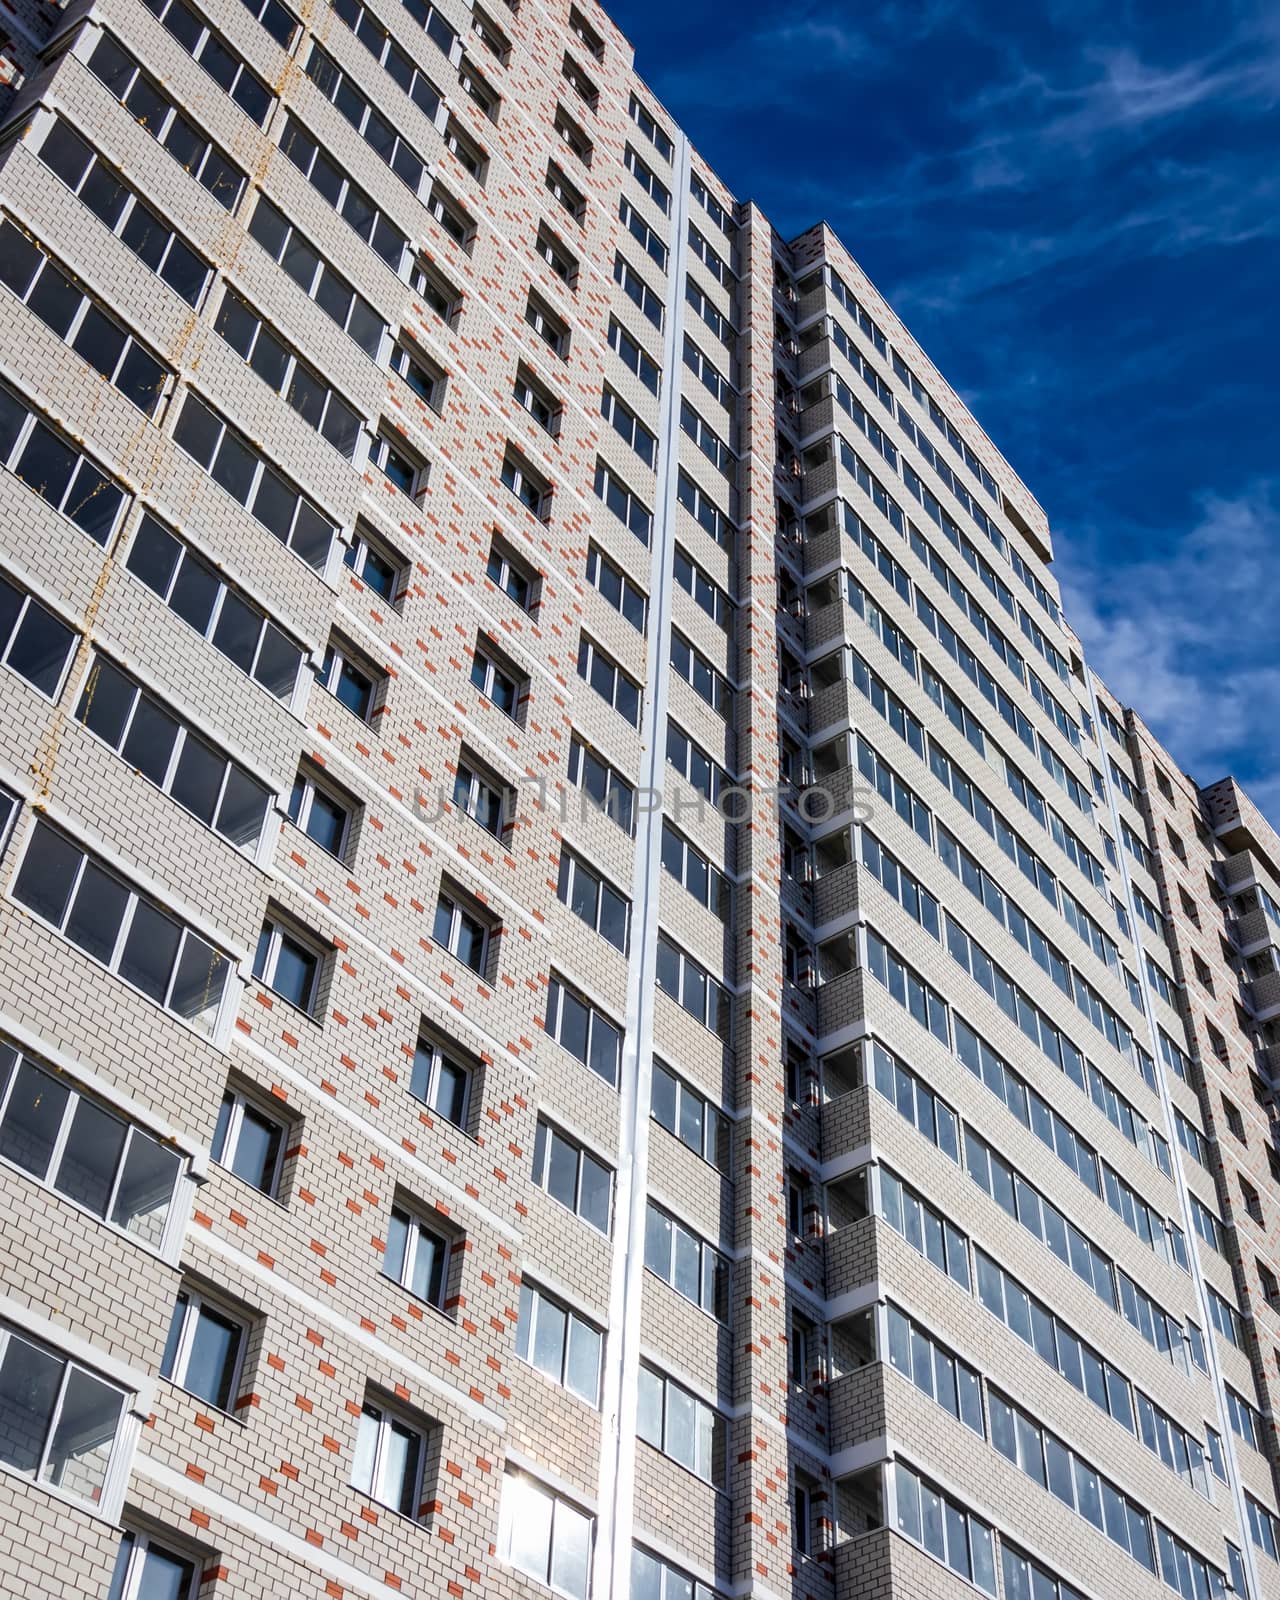 Fragment of a white brick residential building with balconies against a clear sky.